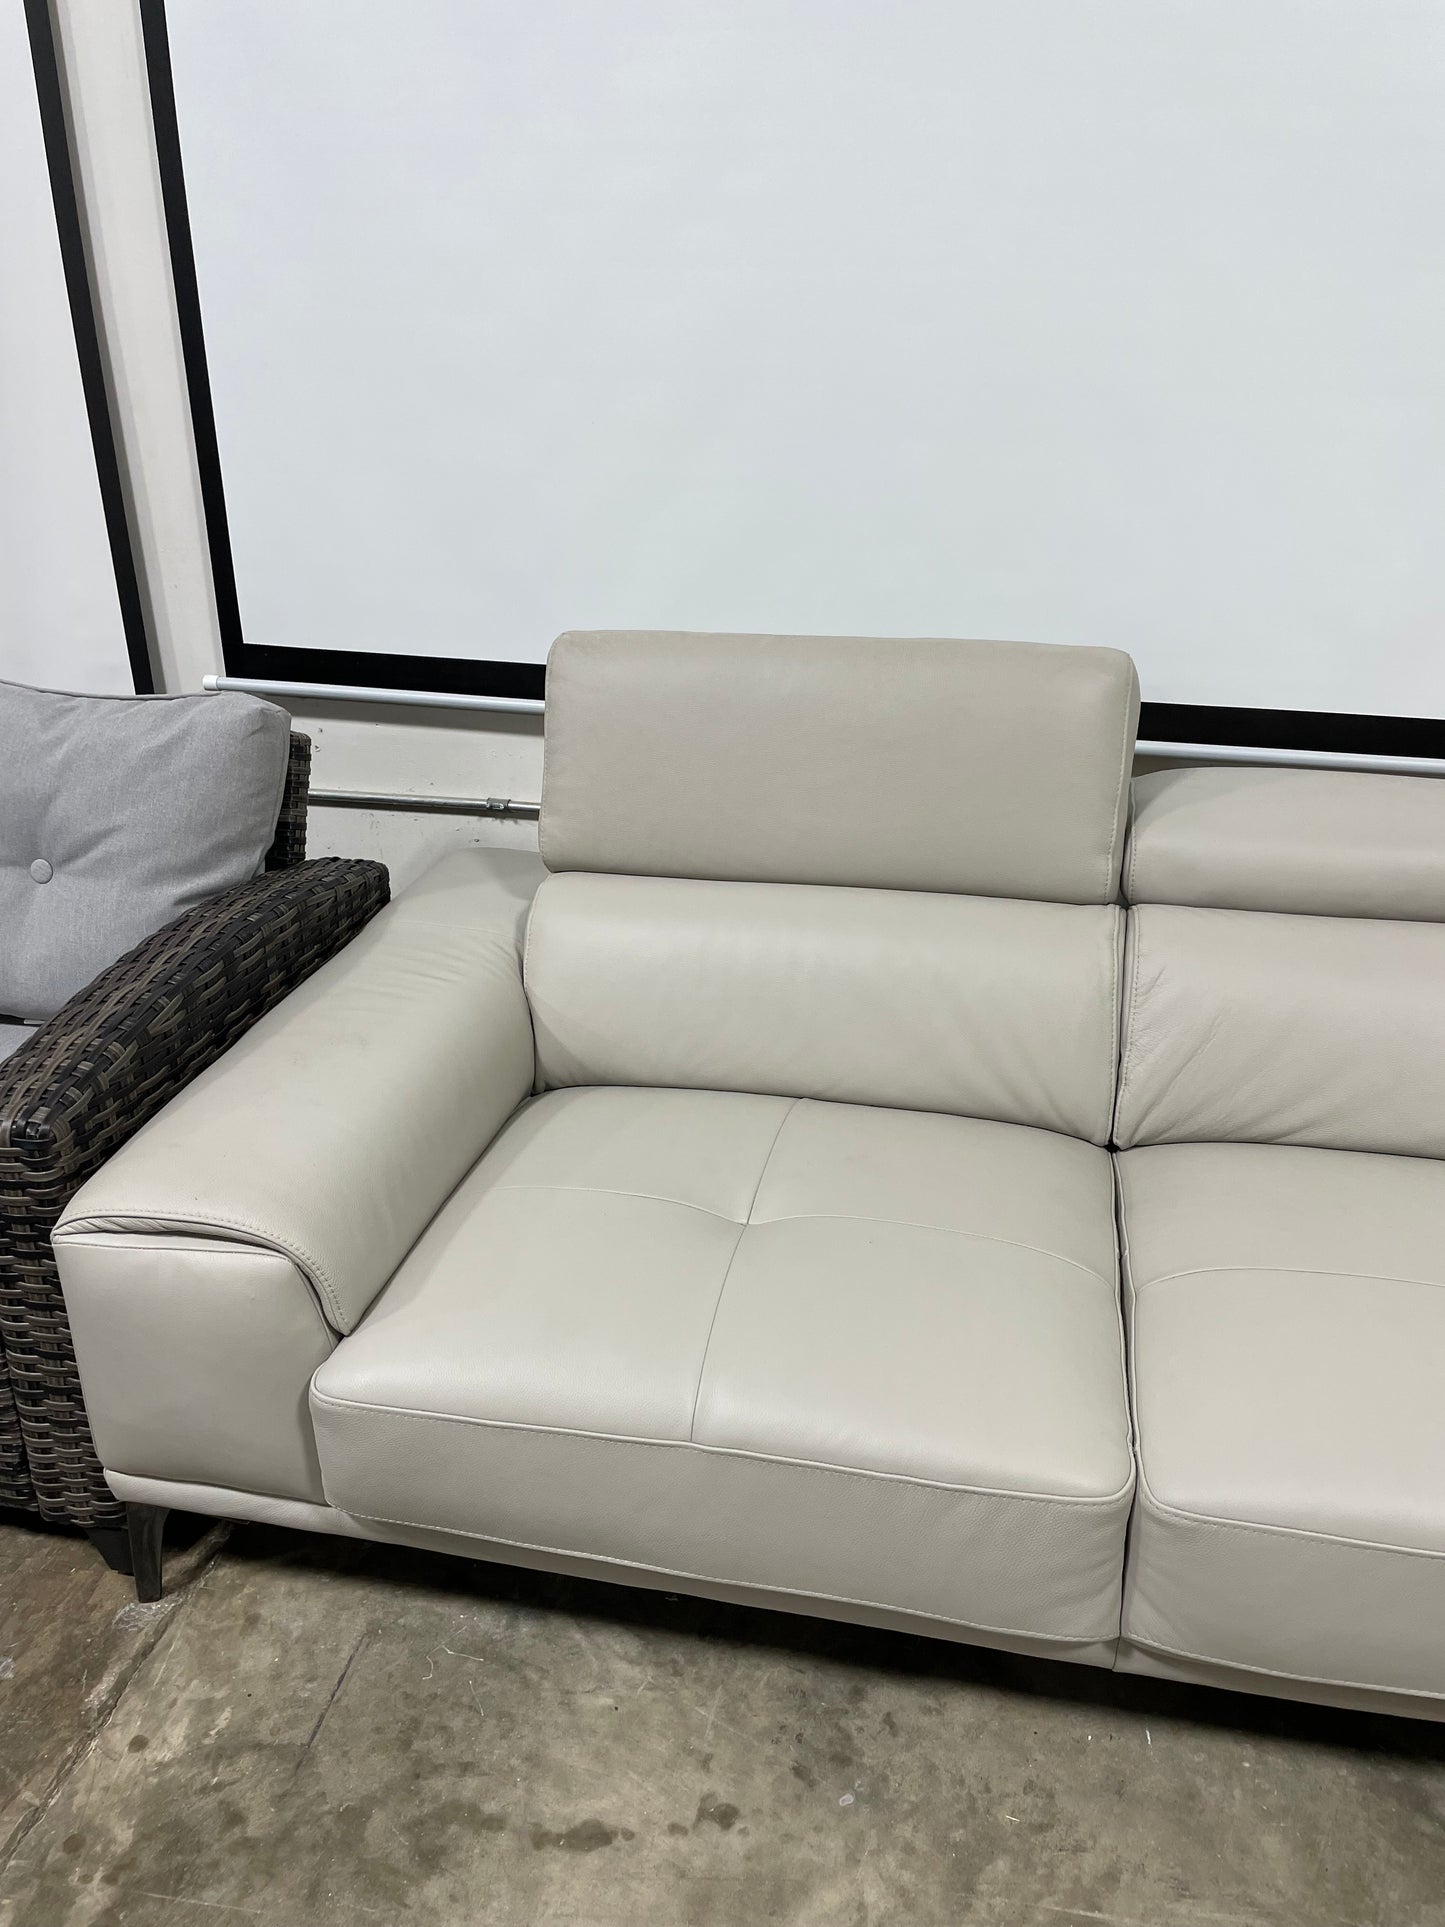 Quinton Top Grain Leather Sectional with Adjustable Headrests